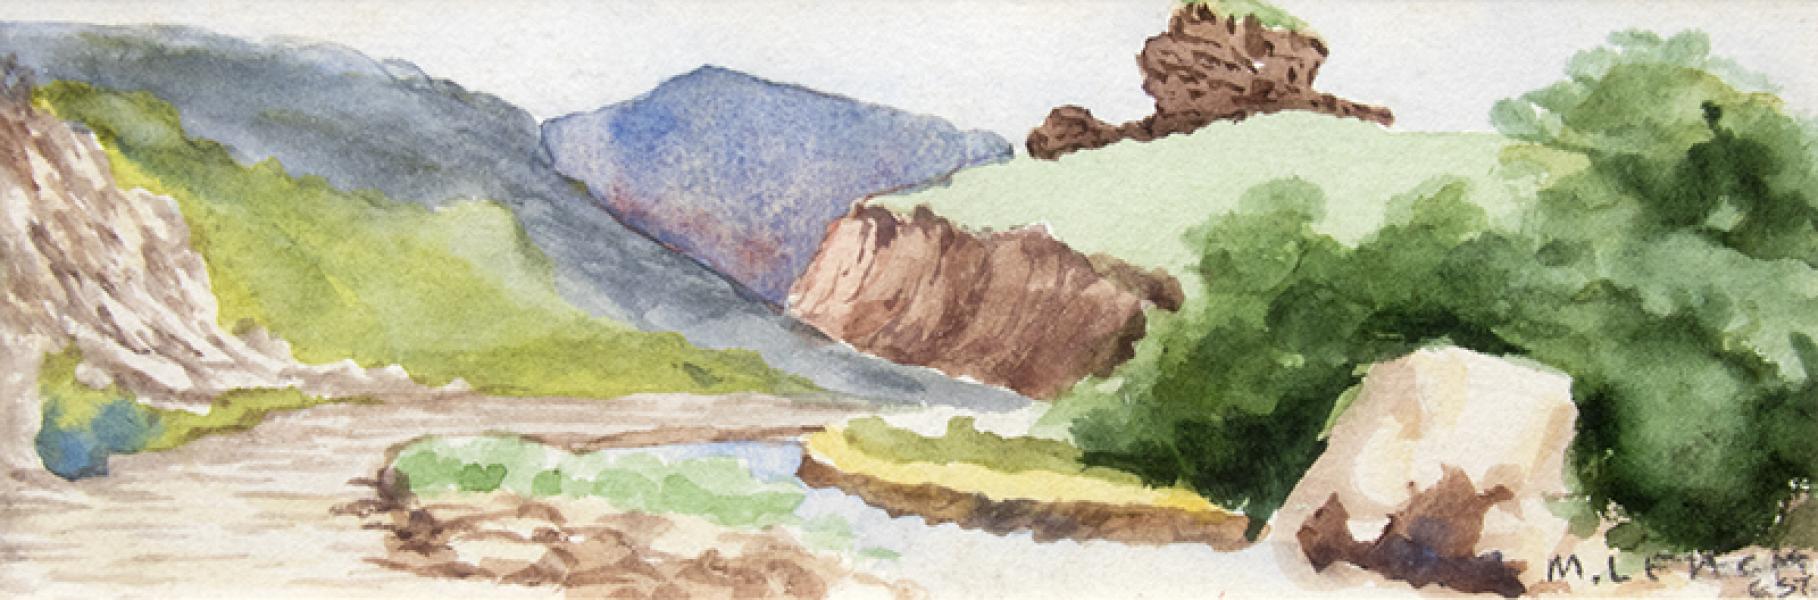 Maude Leach, Mountain Landscape with Creek, watercolor, vintage, painting, early 20th century, woman artist, women, female, green, blue, brown, yellow